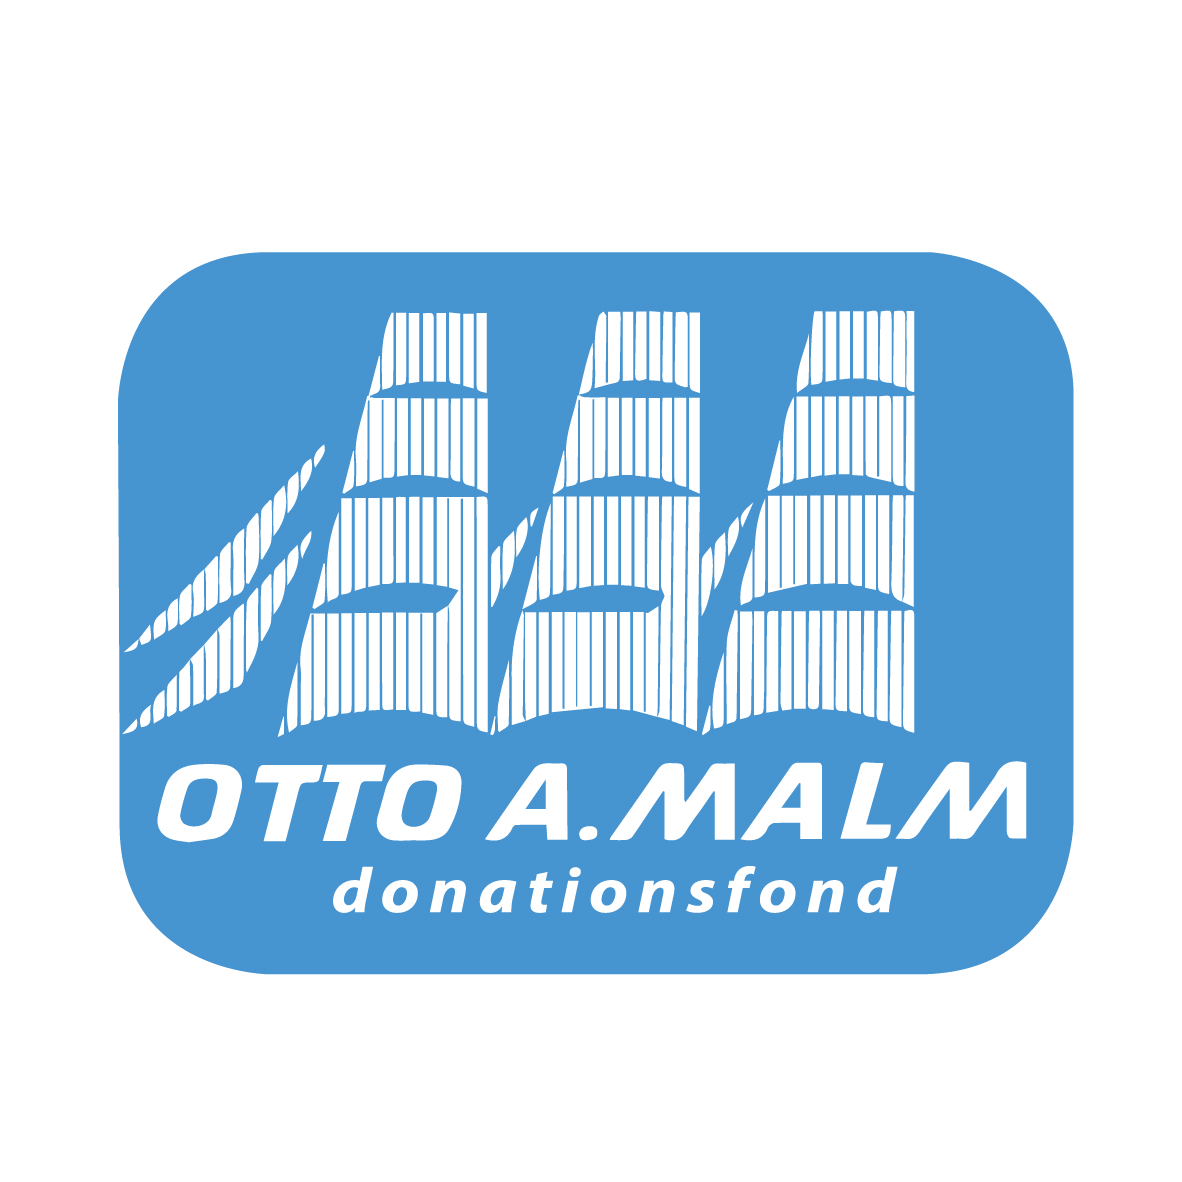 Otto A. Malm Donationsfond logo. The base of the logo is light blue, with white silhouettes of sails on top. Below, in large white letters, reads 'Otto A. Malm', and beneath this 'donationsfond'.